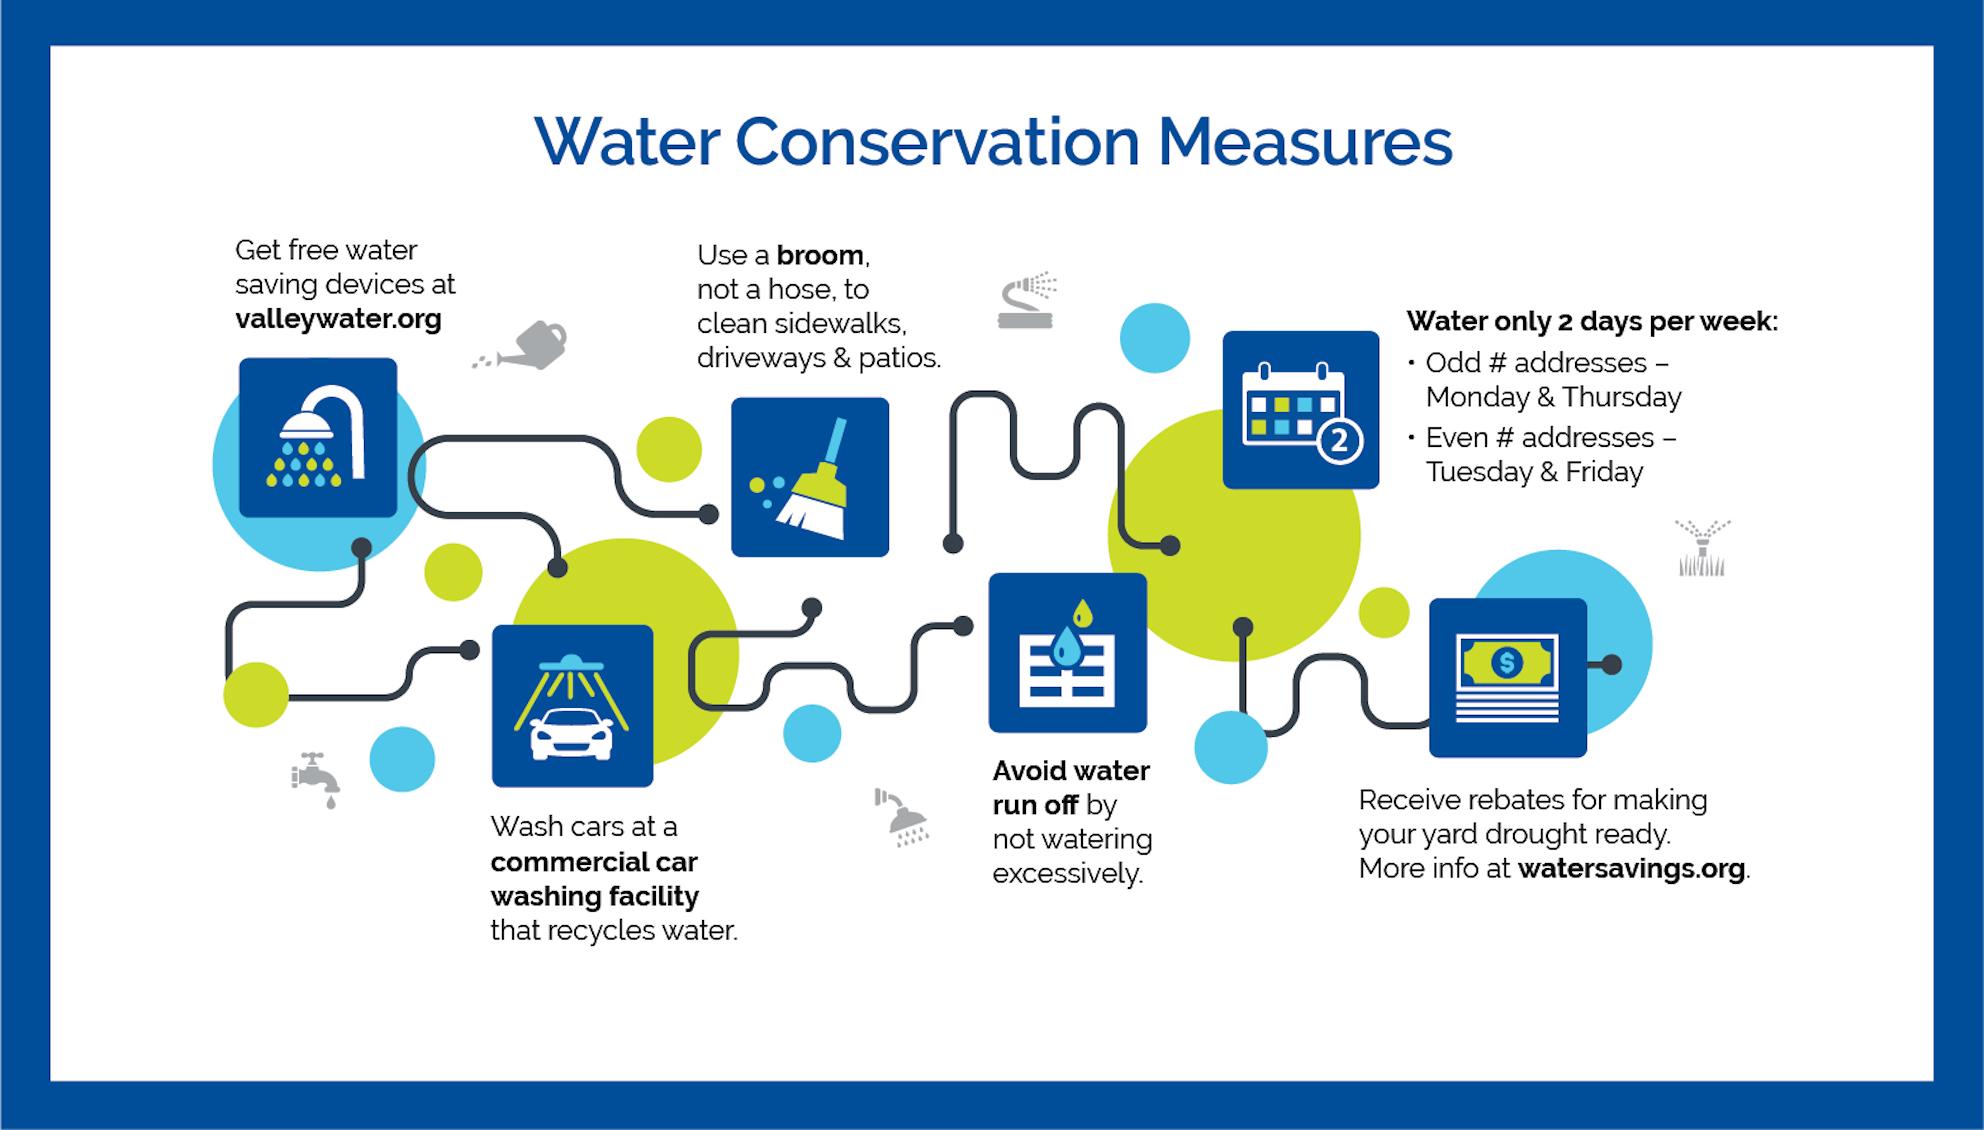 Drought and conservation measures